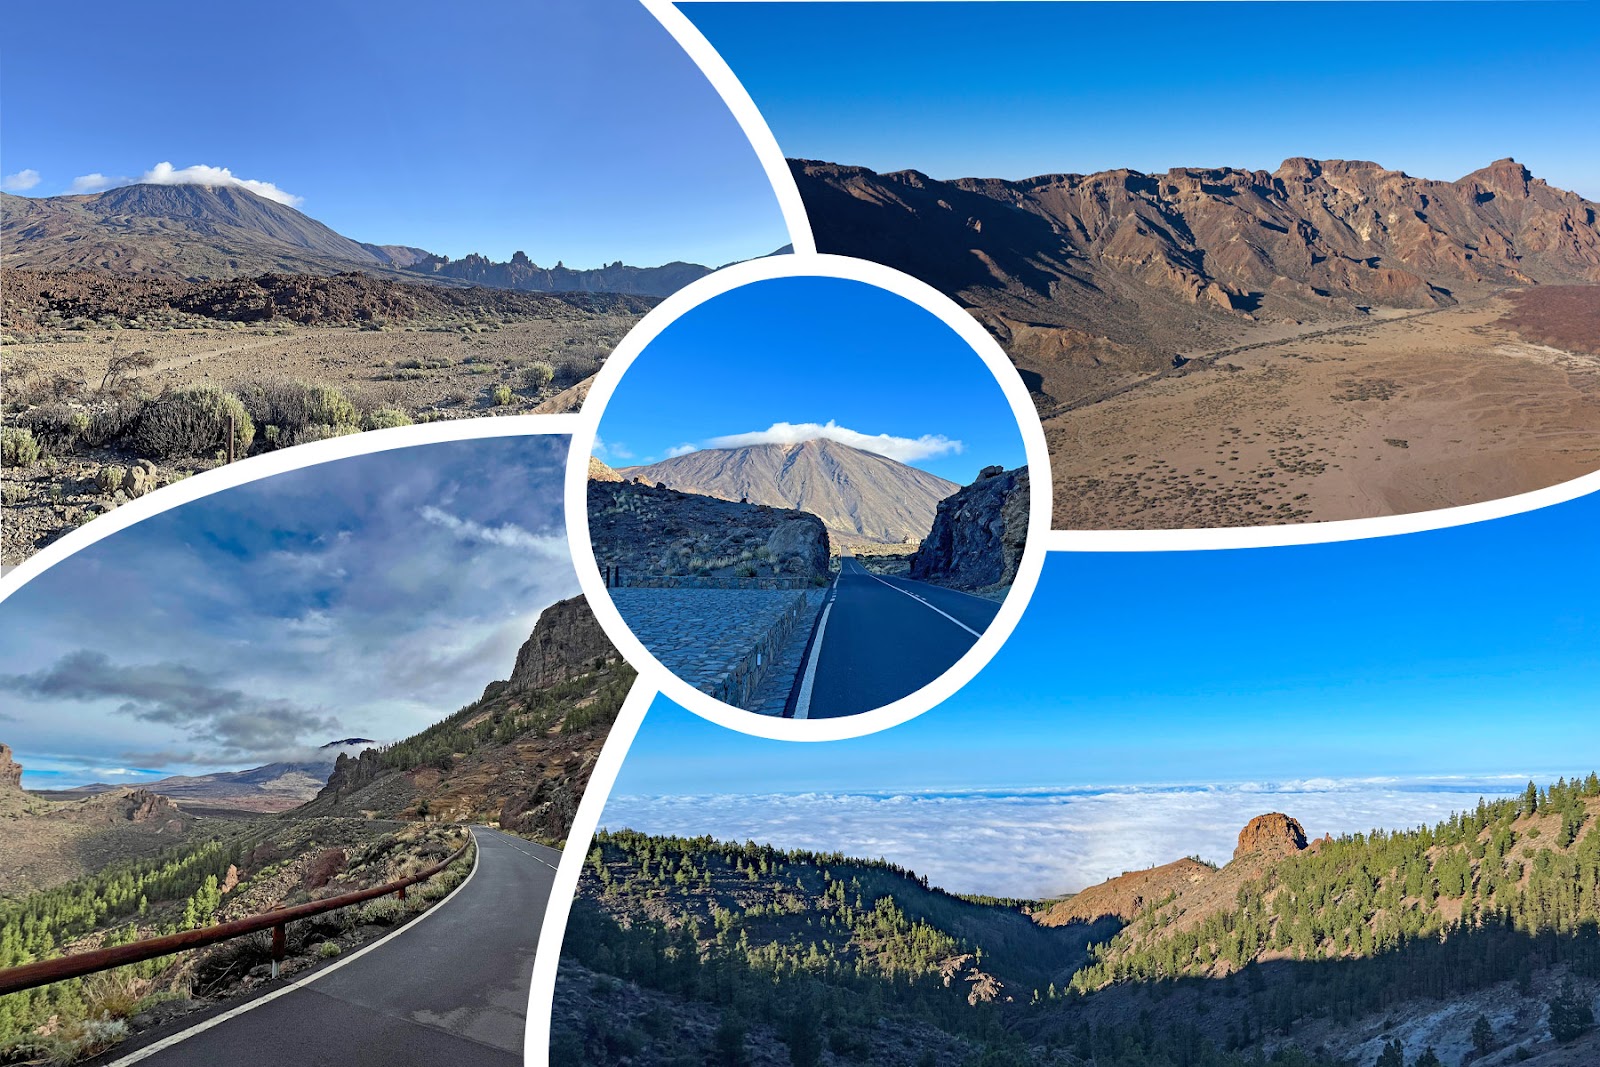 photo collage shows the segment of the climb between the National Park sign and the Visitor's Center, alpine setting, Mt. Teide in background